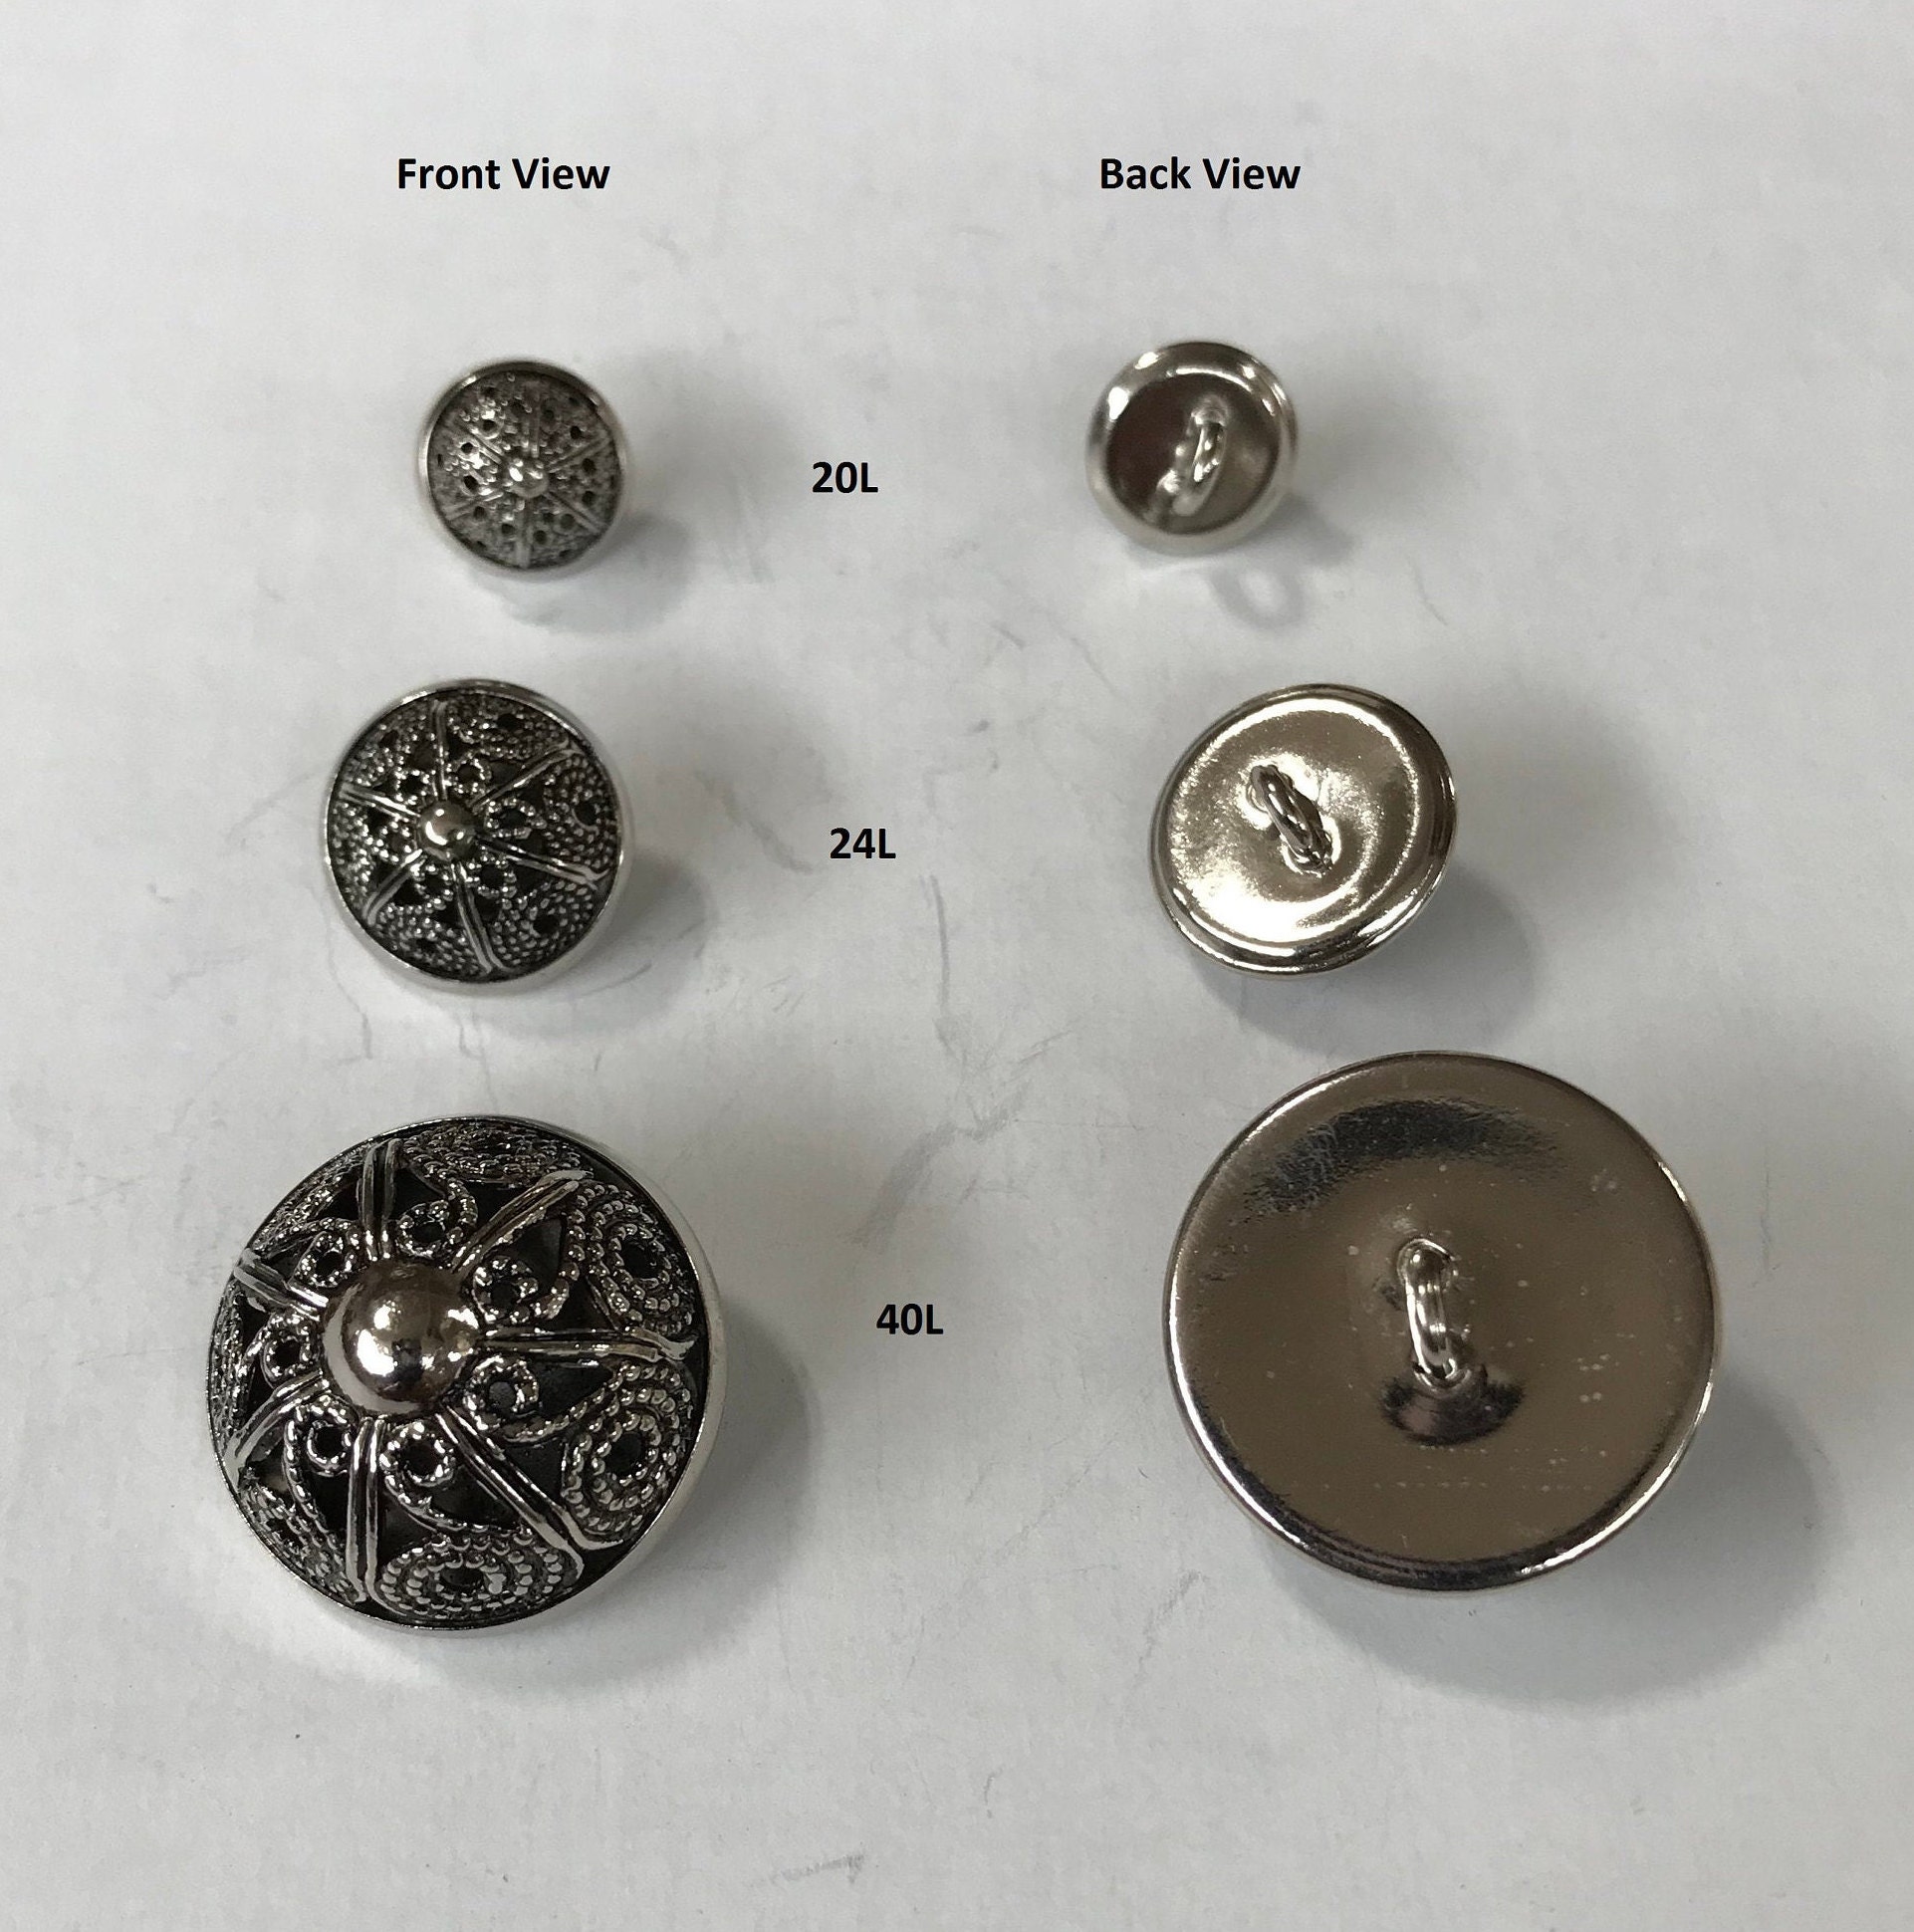 14mm Metal Jeans Buttons, No Sew Tack Buttons With Metal Pin, Pinback Jeans Buttons  for Jeans, Jackets, Denim, Trouser, Skirts 